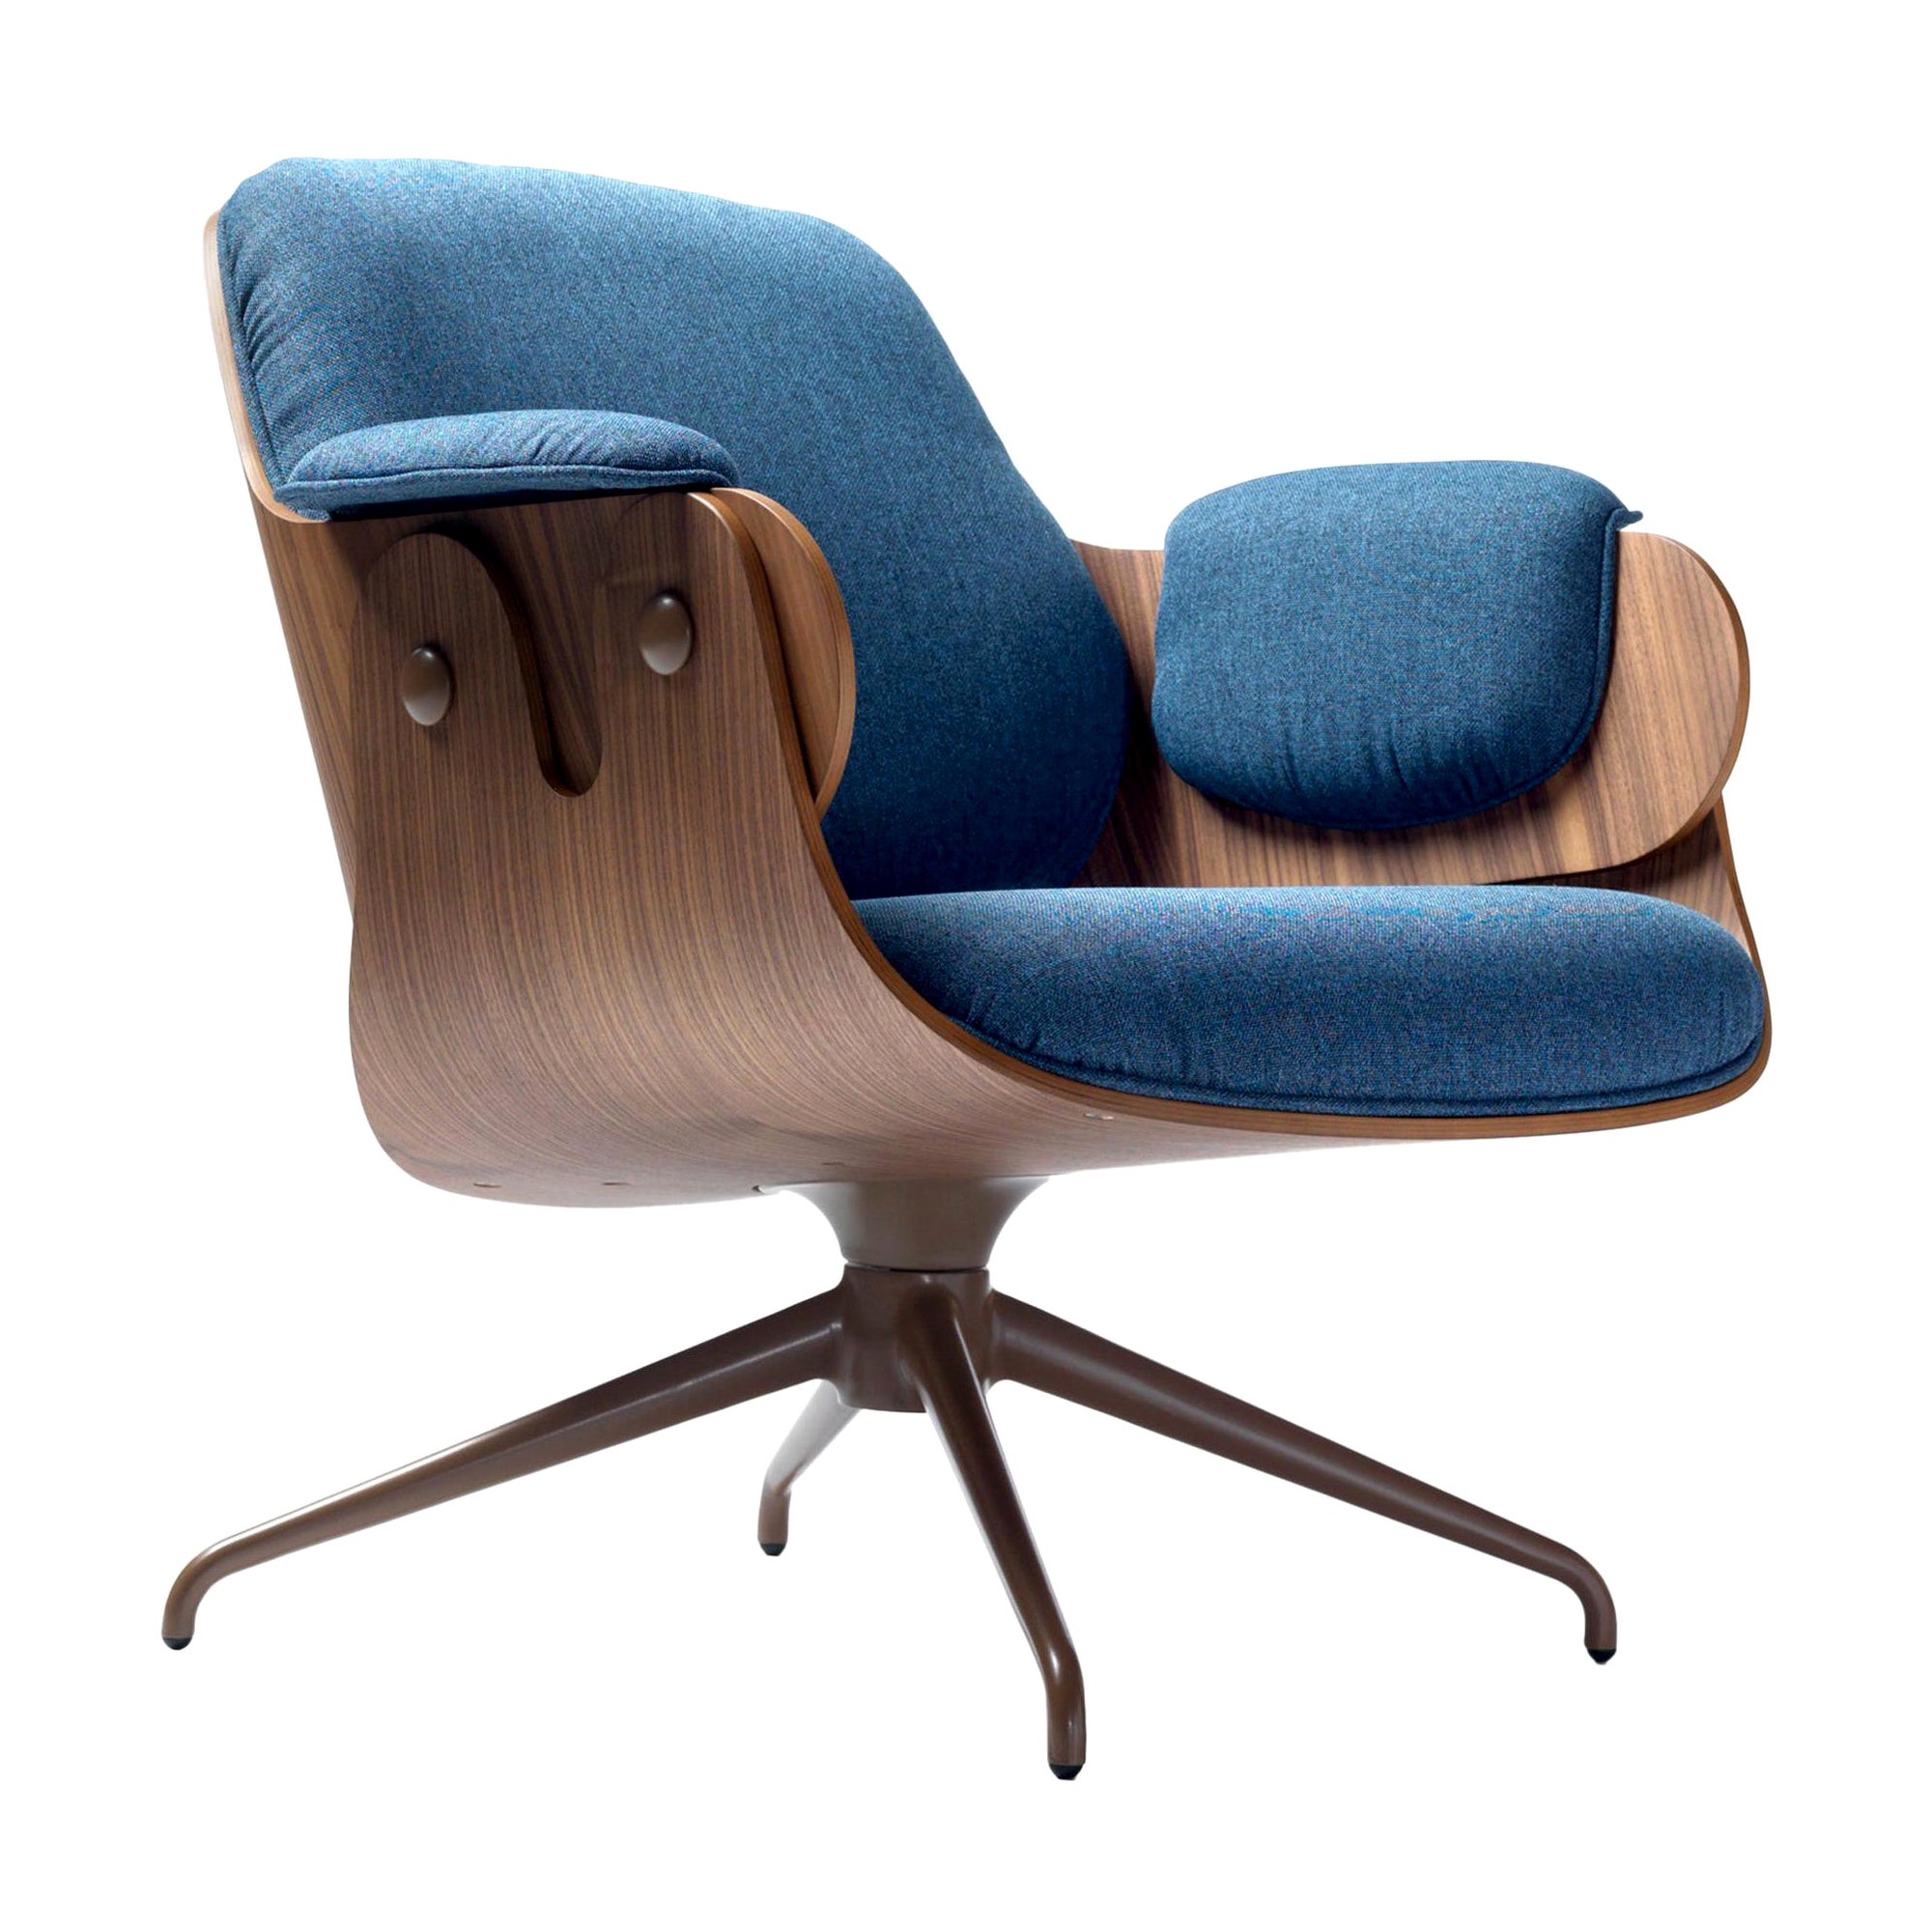 Jaime Hayon, Contemporary, Walnut, Blue Upholstery Low Lounger Armchair For Sale